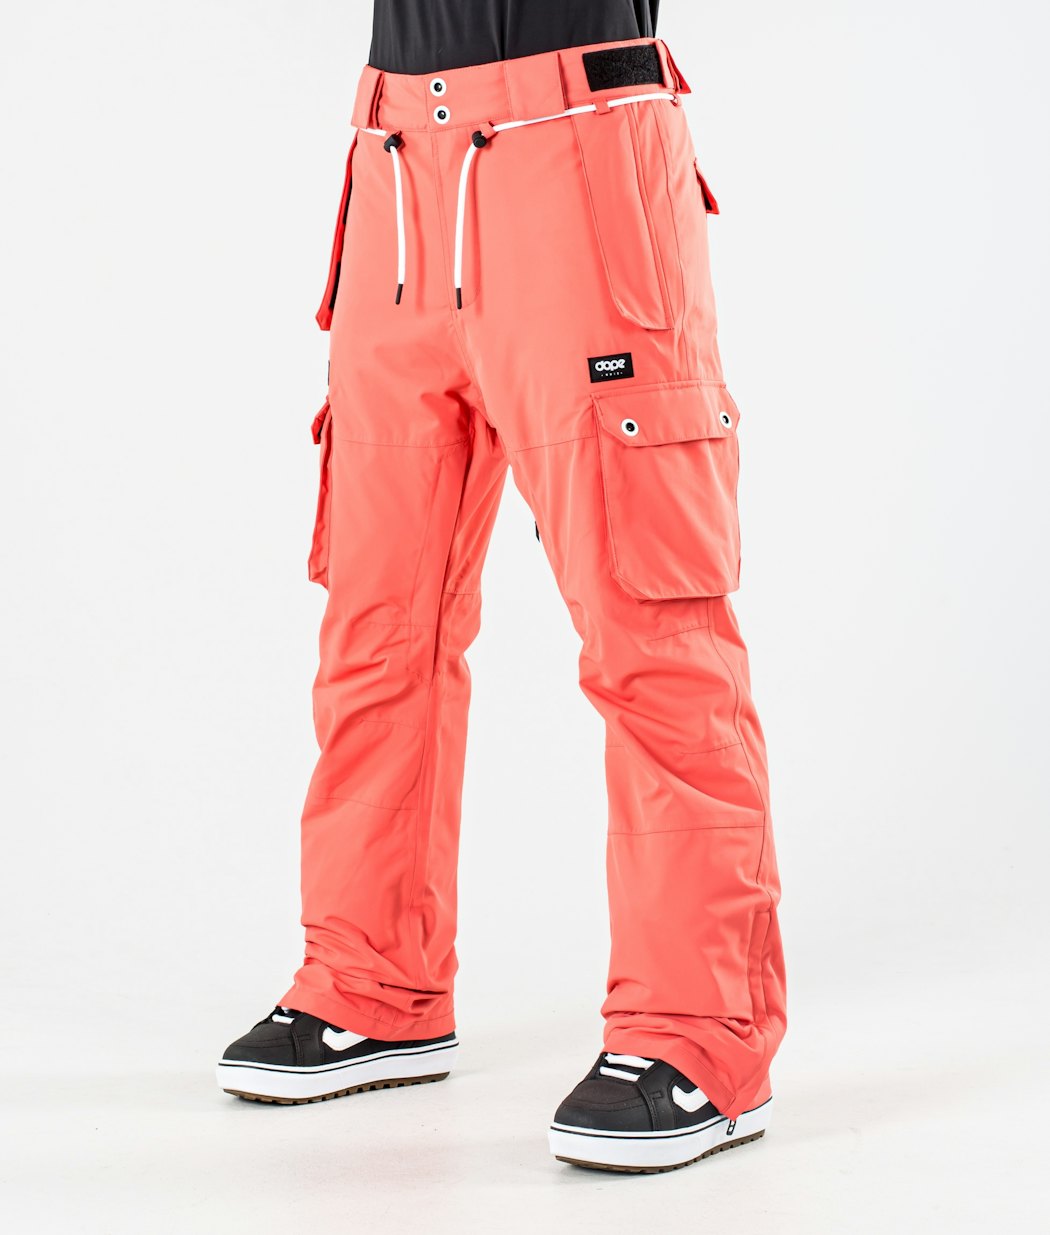 Dope Iconic W 2020 Women's Snowboard Pants Coral